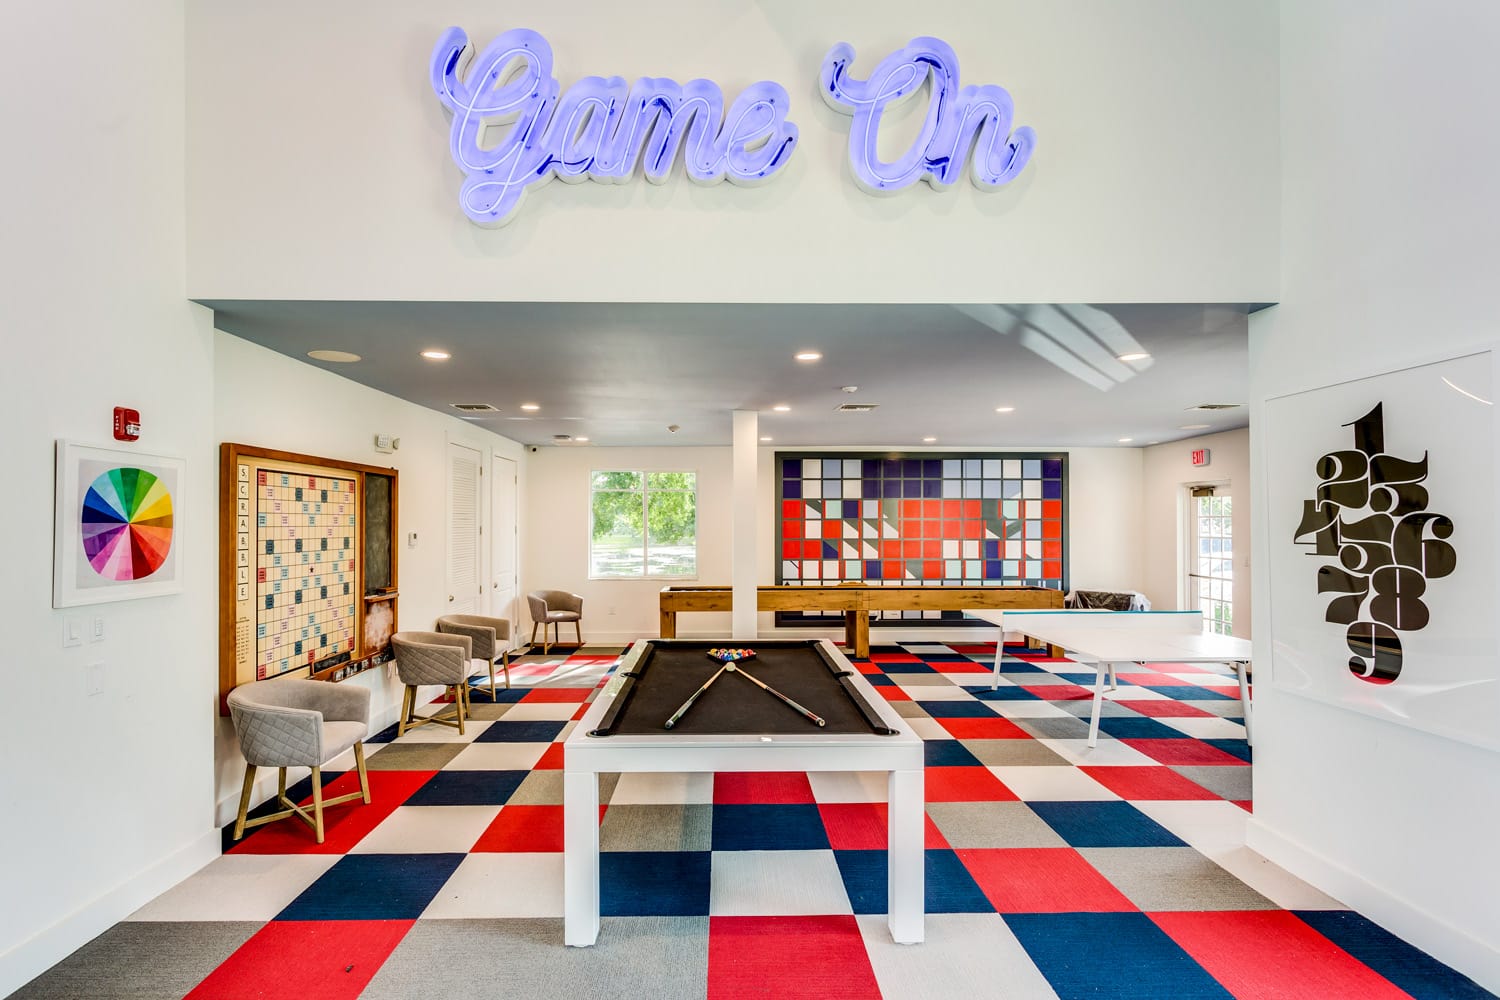 Game room interiors in Arbor Oaks apartment building designed by Annette Jaffe Interiors